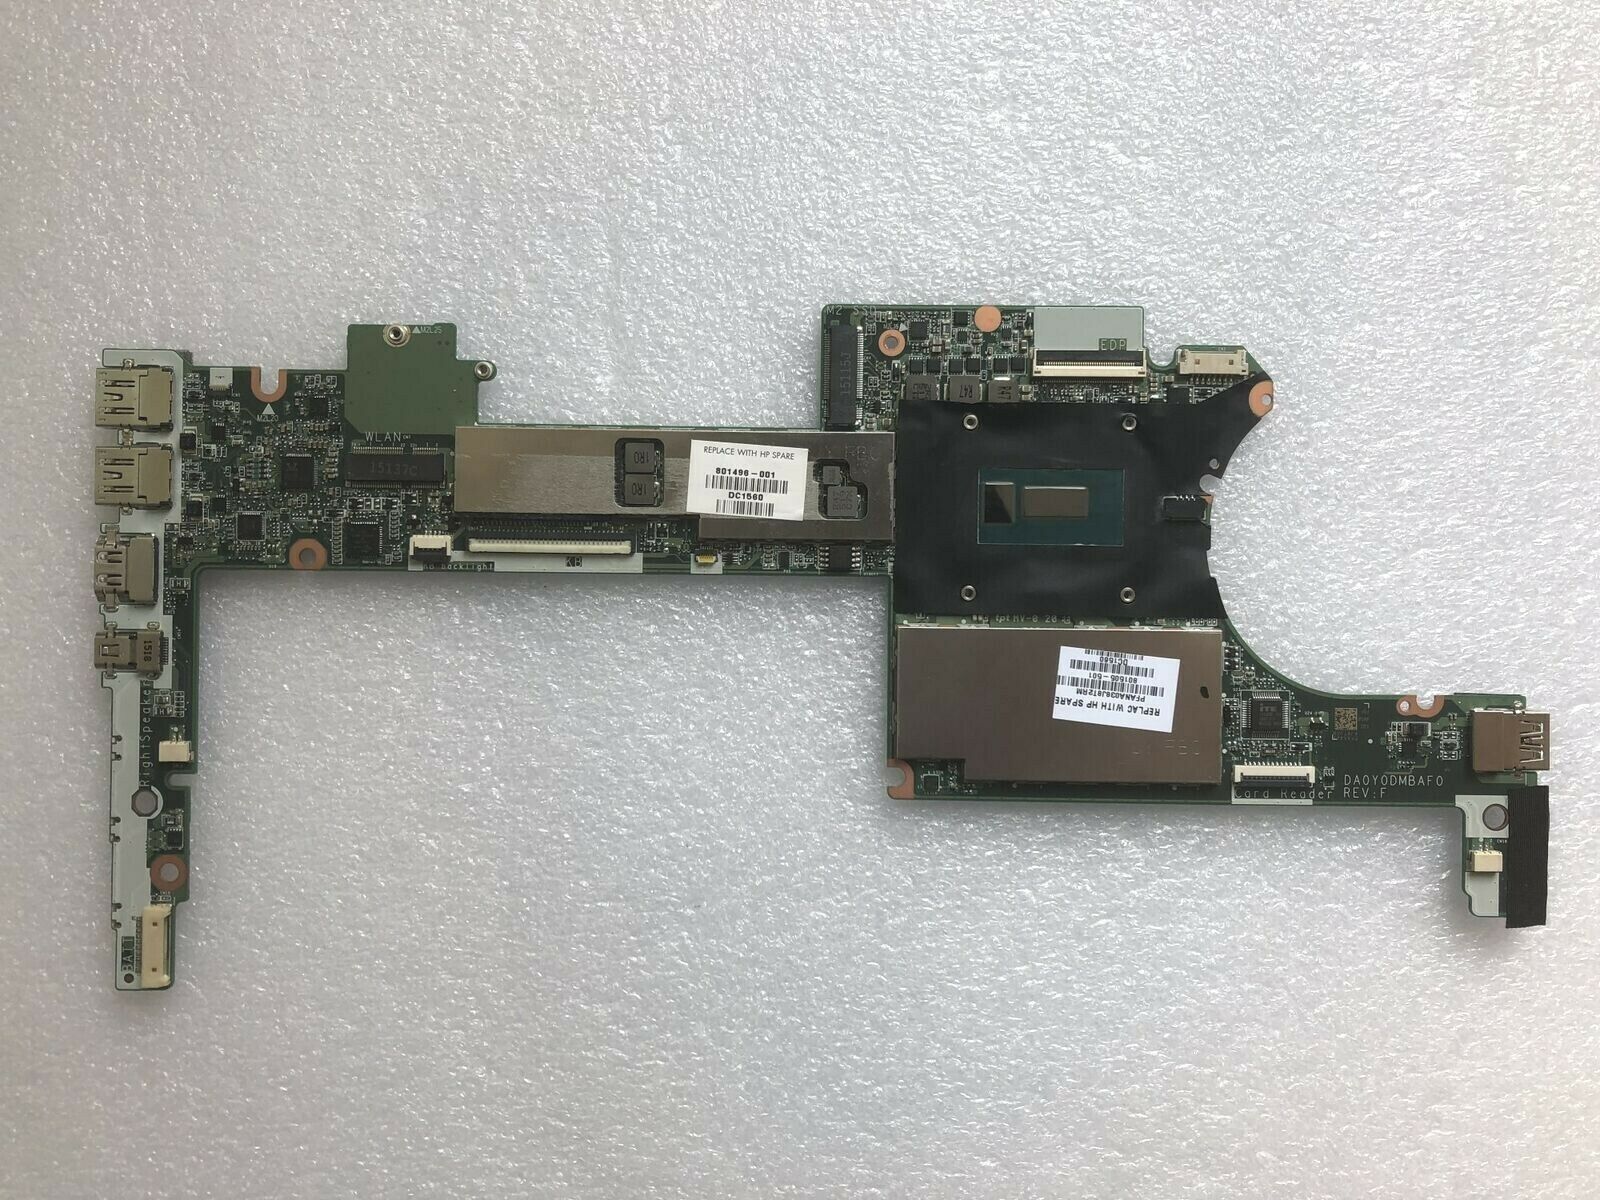 801505-501 For HP SPECTRE X360 13-4001 Laptop Motherboard Intel I7-5500 CPU Compatible CPU Brand: Intel Mem - Click Image to Close